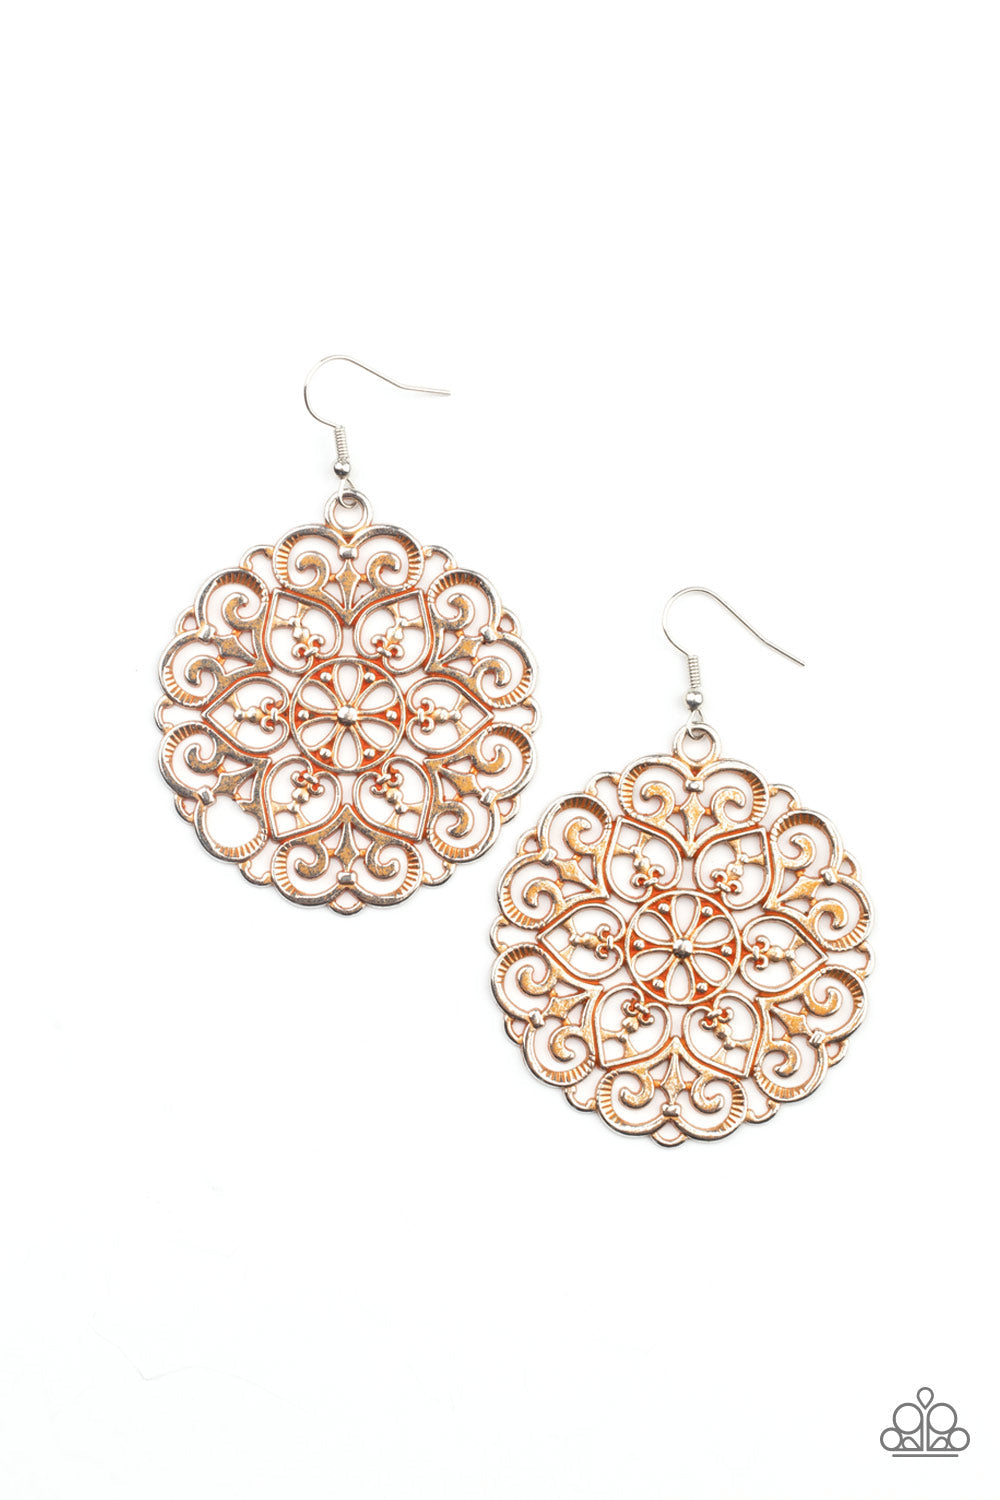 MANDALA Effect - Orange and Silver Fashion Earrings - Paparazzi Accessories - Brushed in a rustic orange finish, an oversized mandala-like silver frame swings from the ear for a seasonal pop of color. Earring attaches to a standard fishhook fitting. Sold as one pair of earrings.